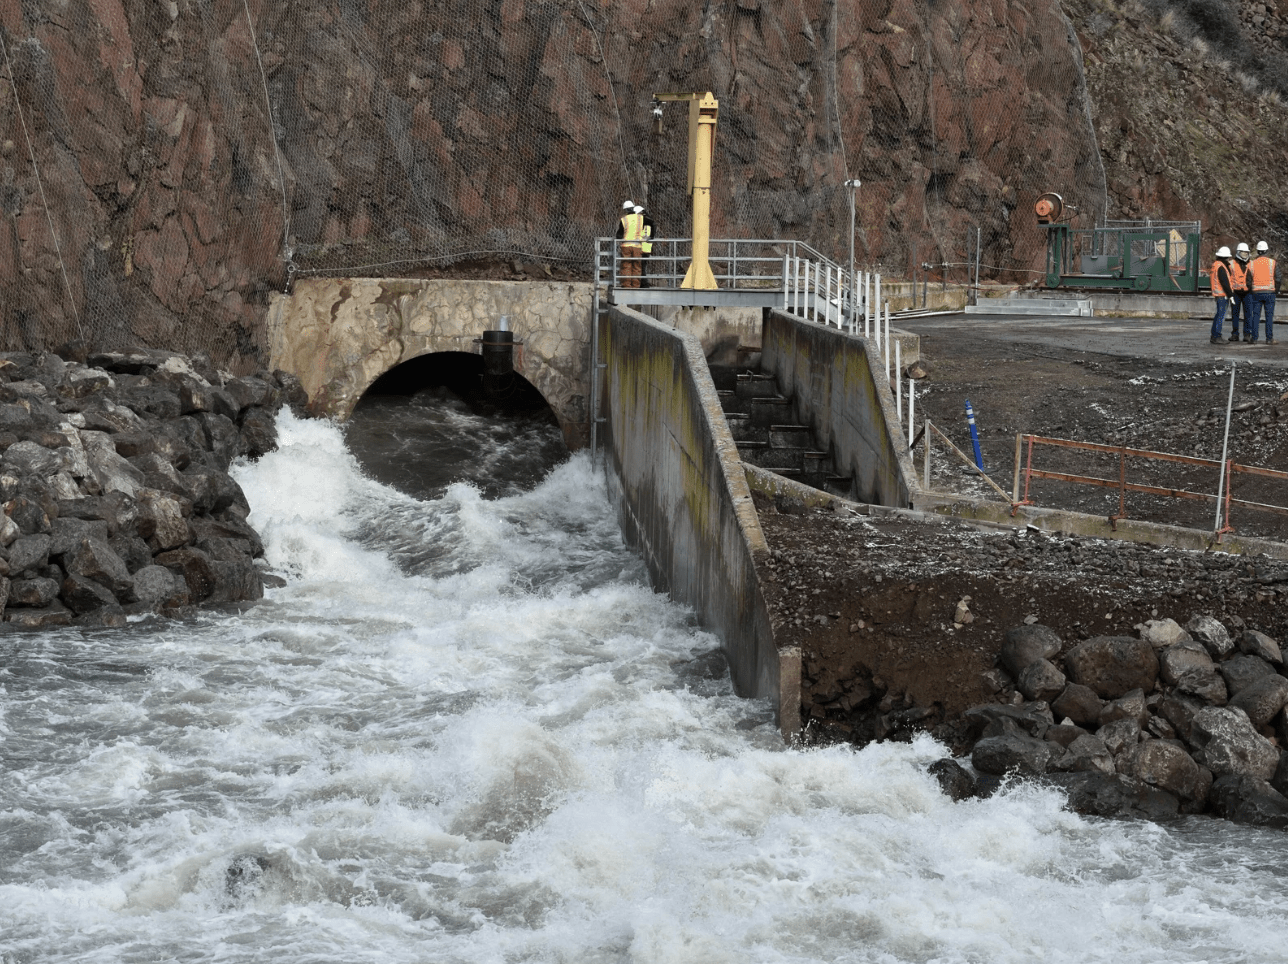 No turning back: The largest dam removal in U.S. history begins